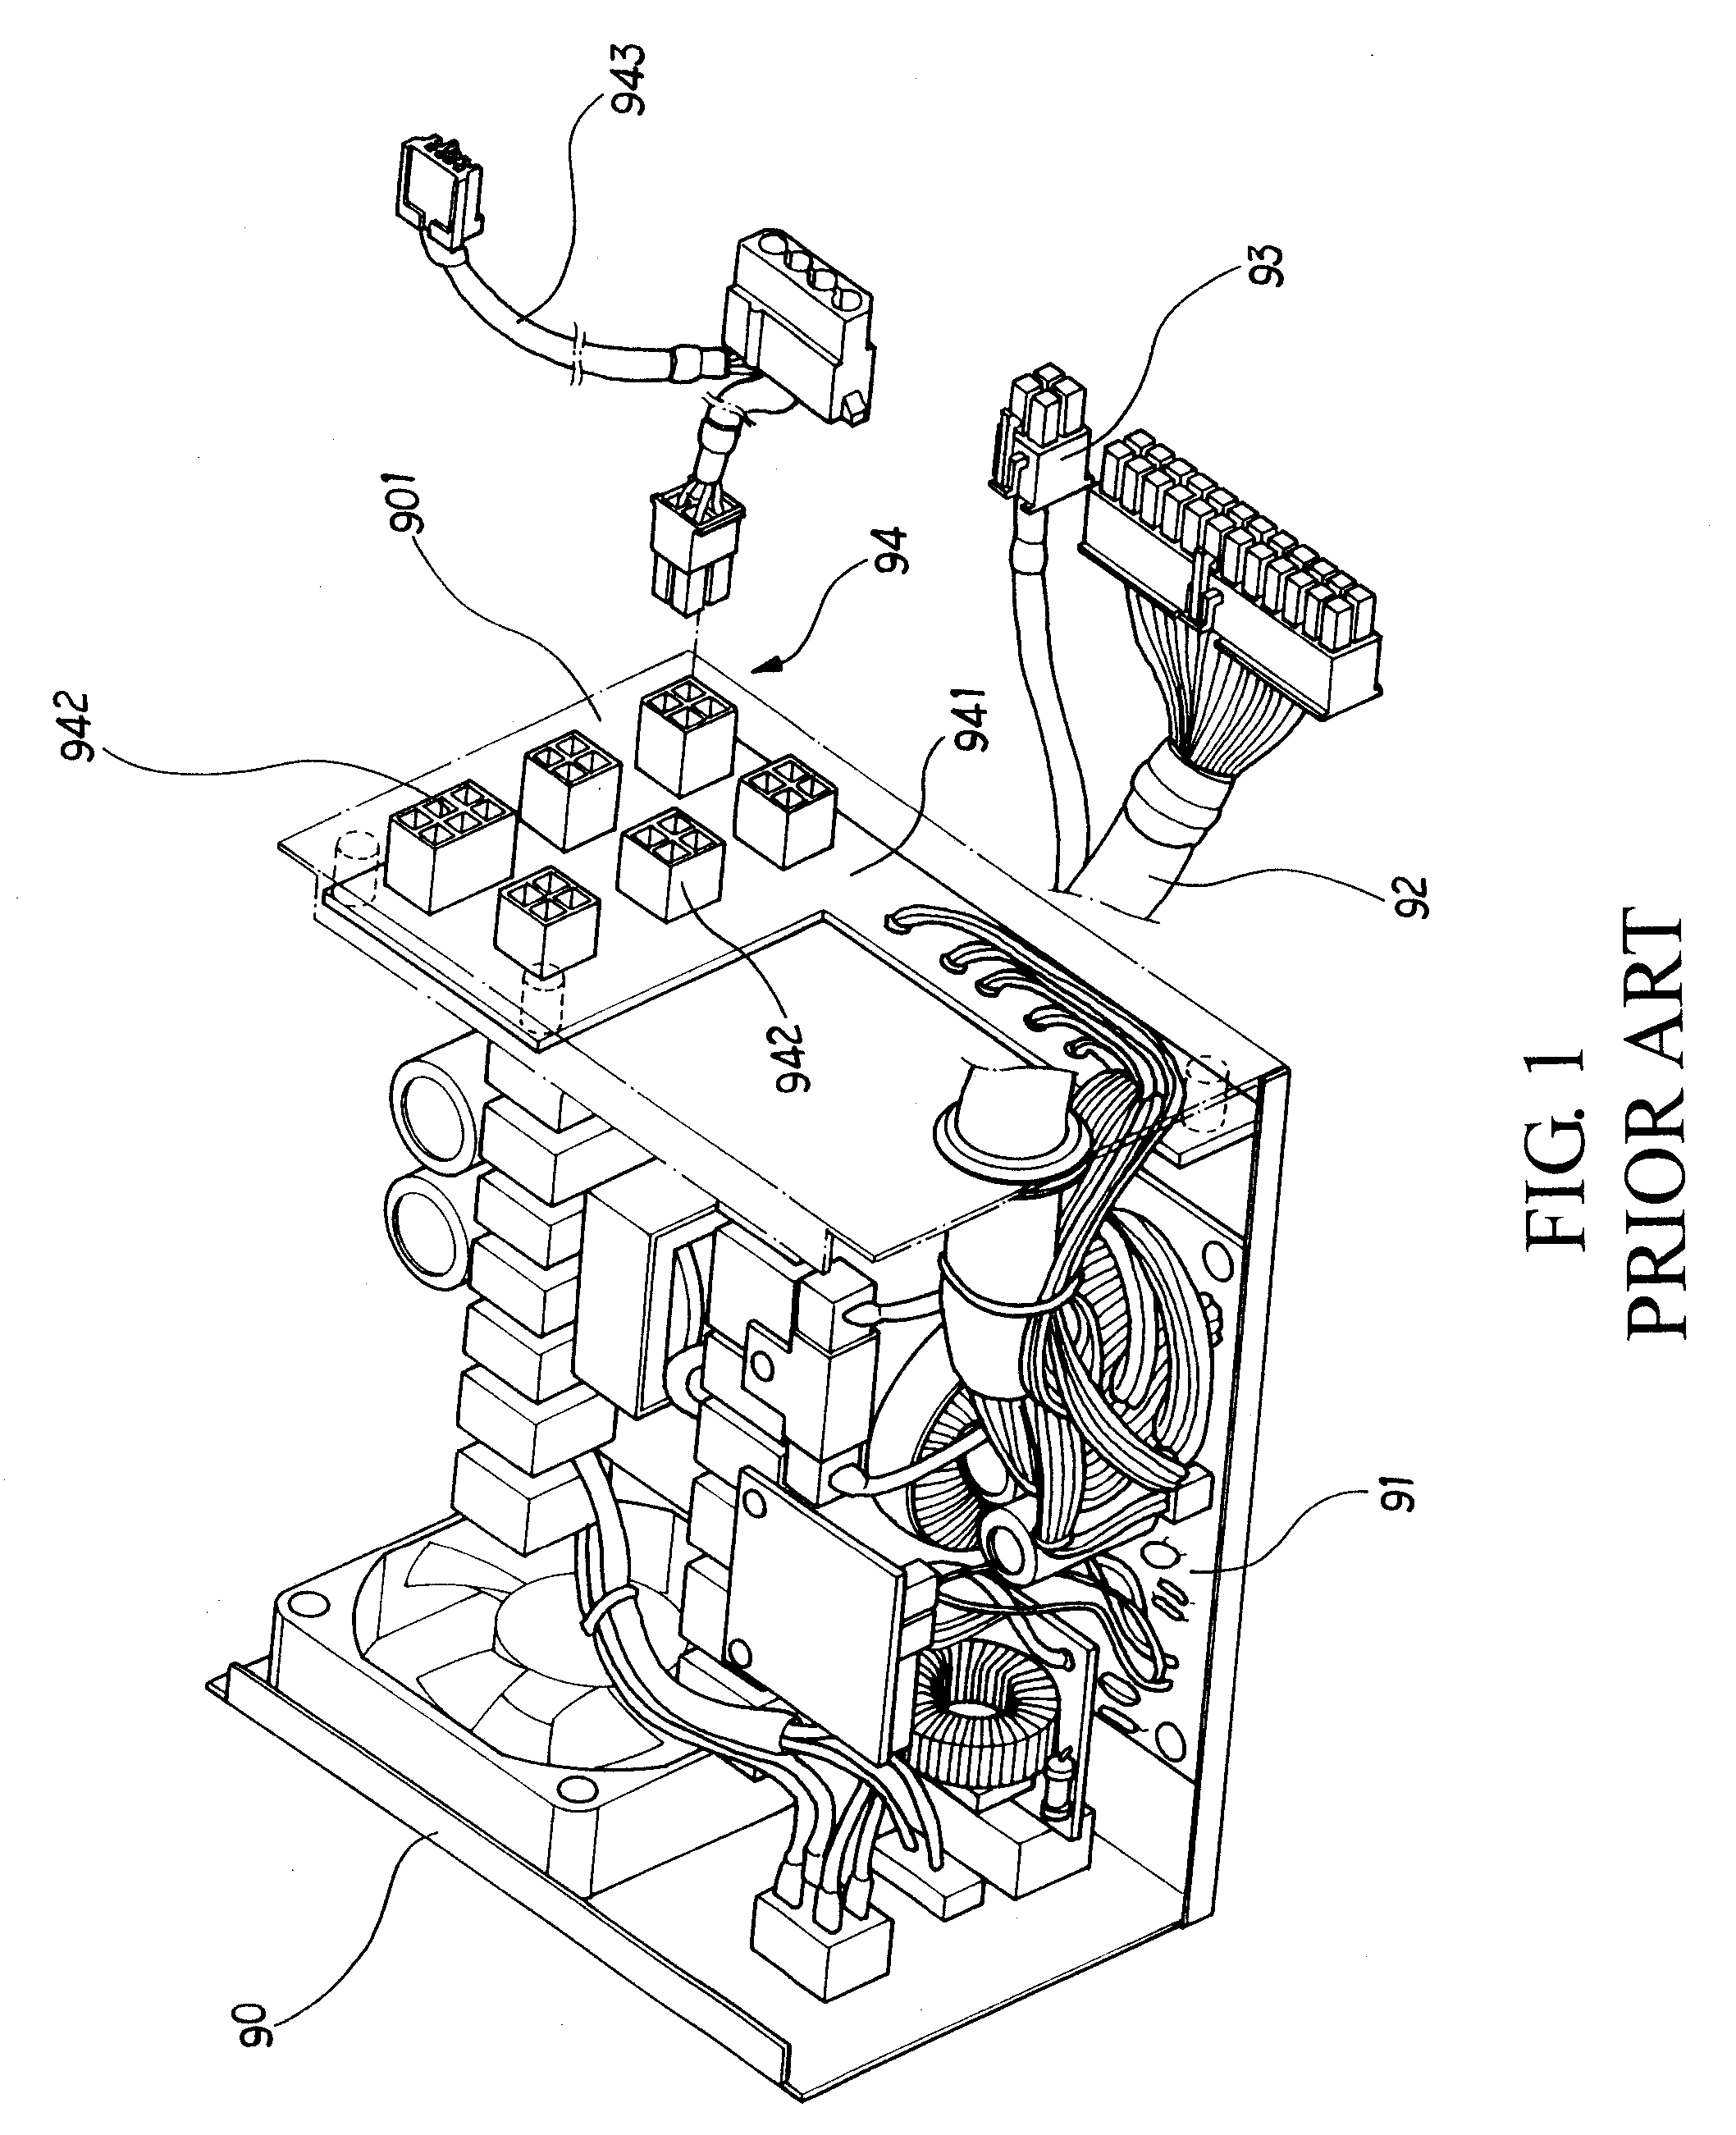 Power supply device with a power output assembly